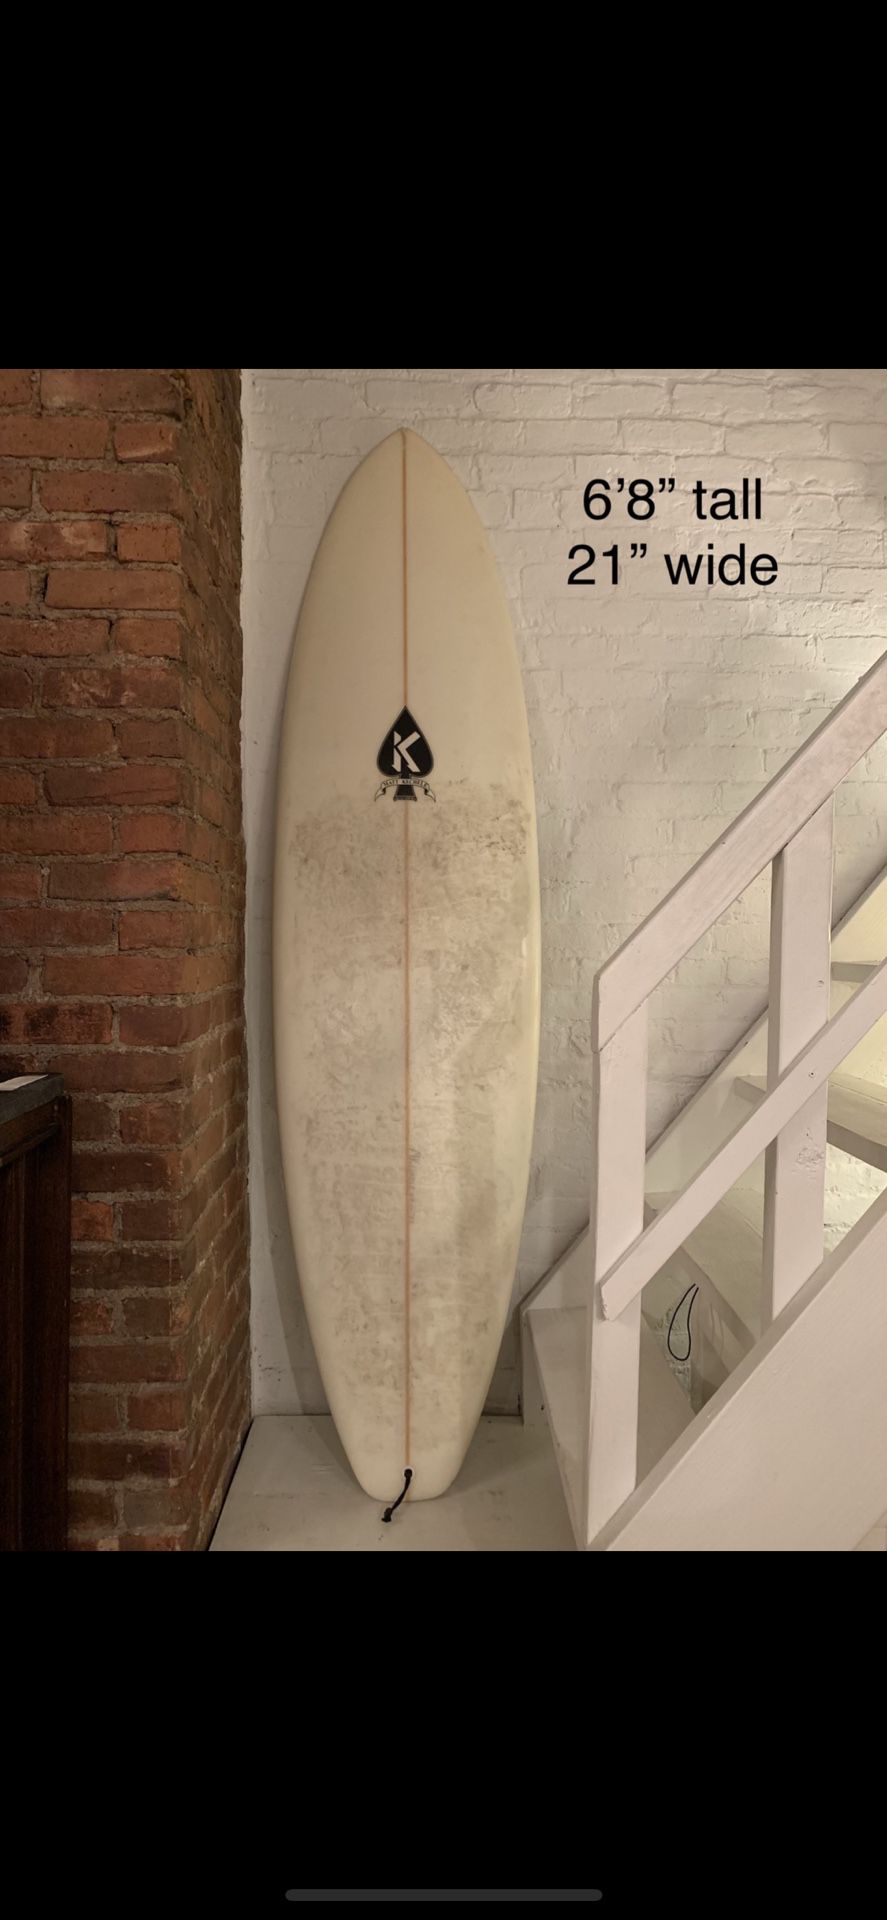 Surfboard, hand shaped by Matt keckley. Great board that needs a little doctoring on the tip. Easily fixed.